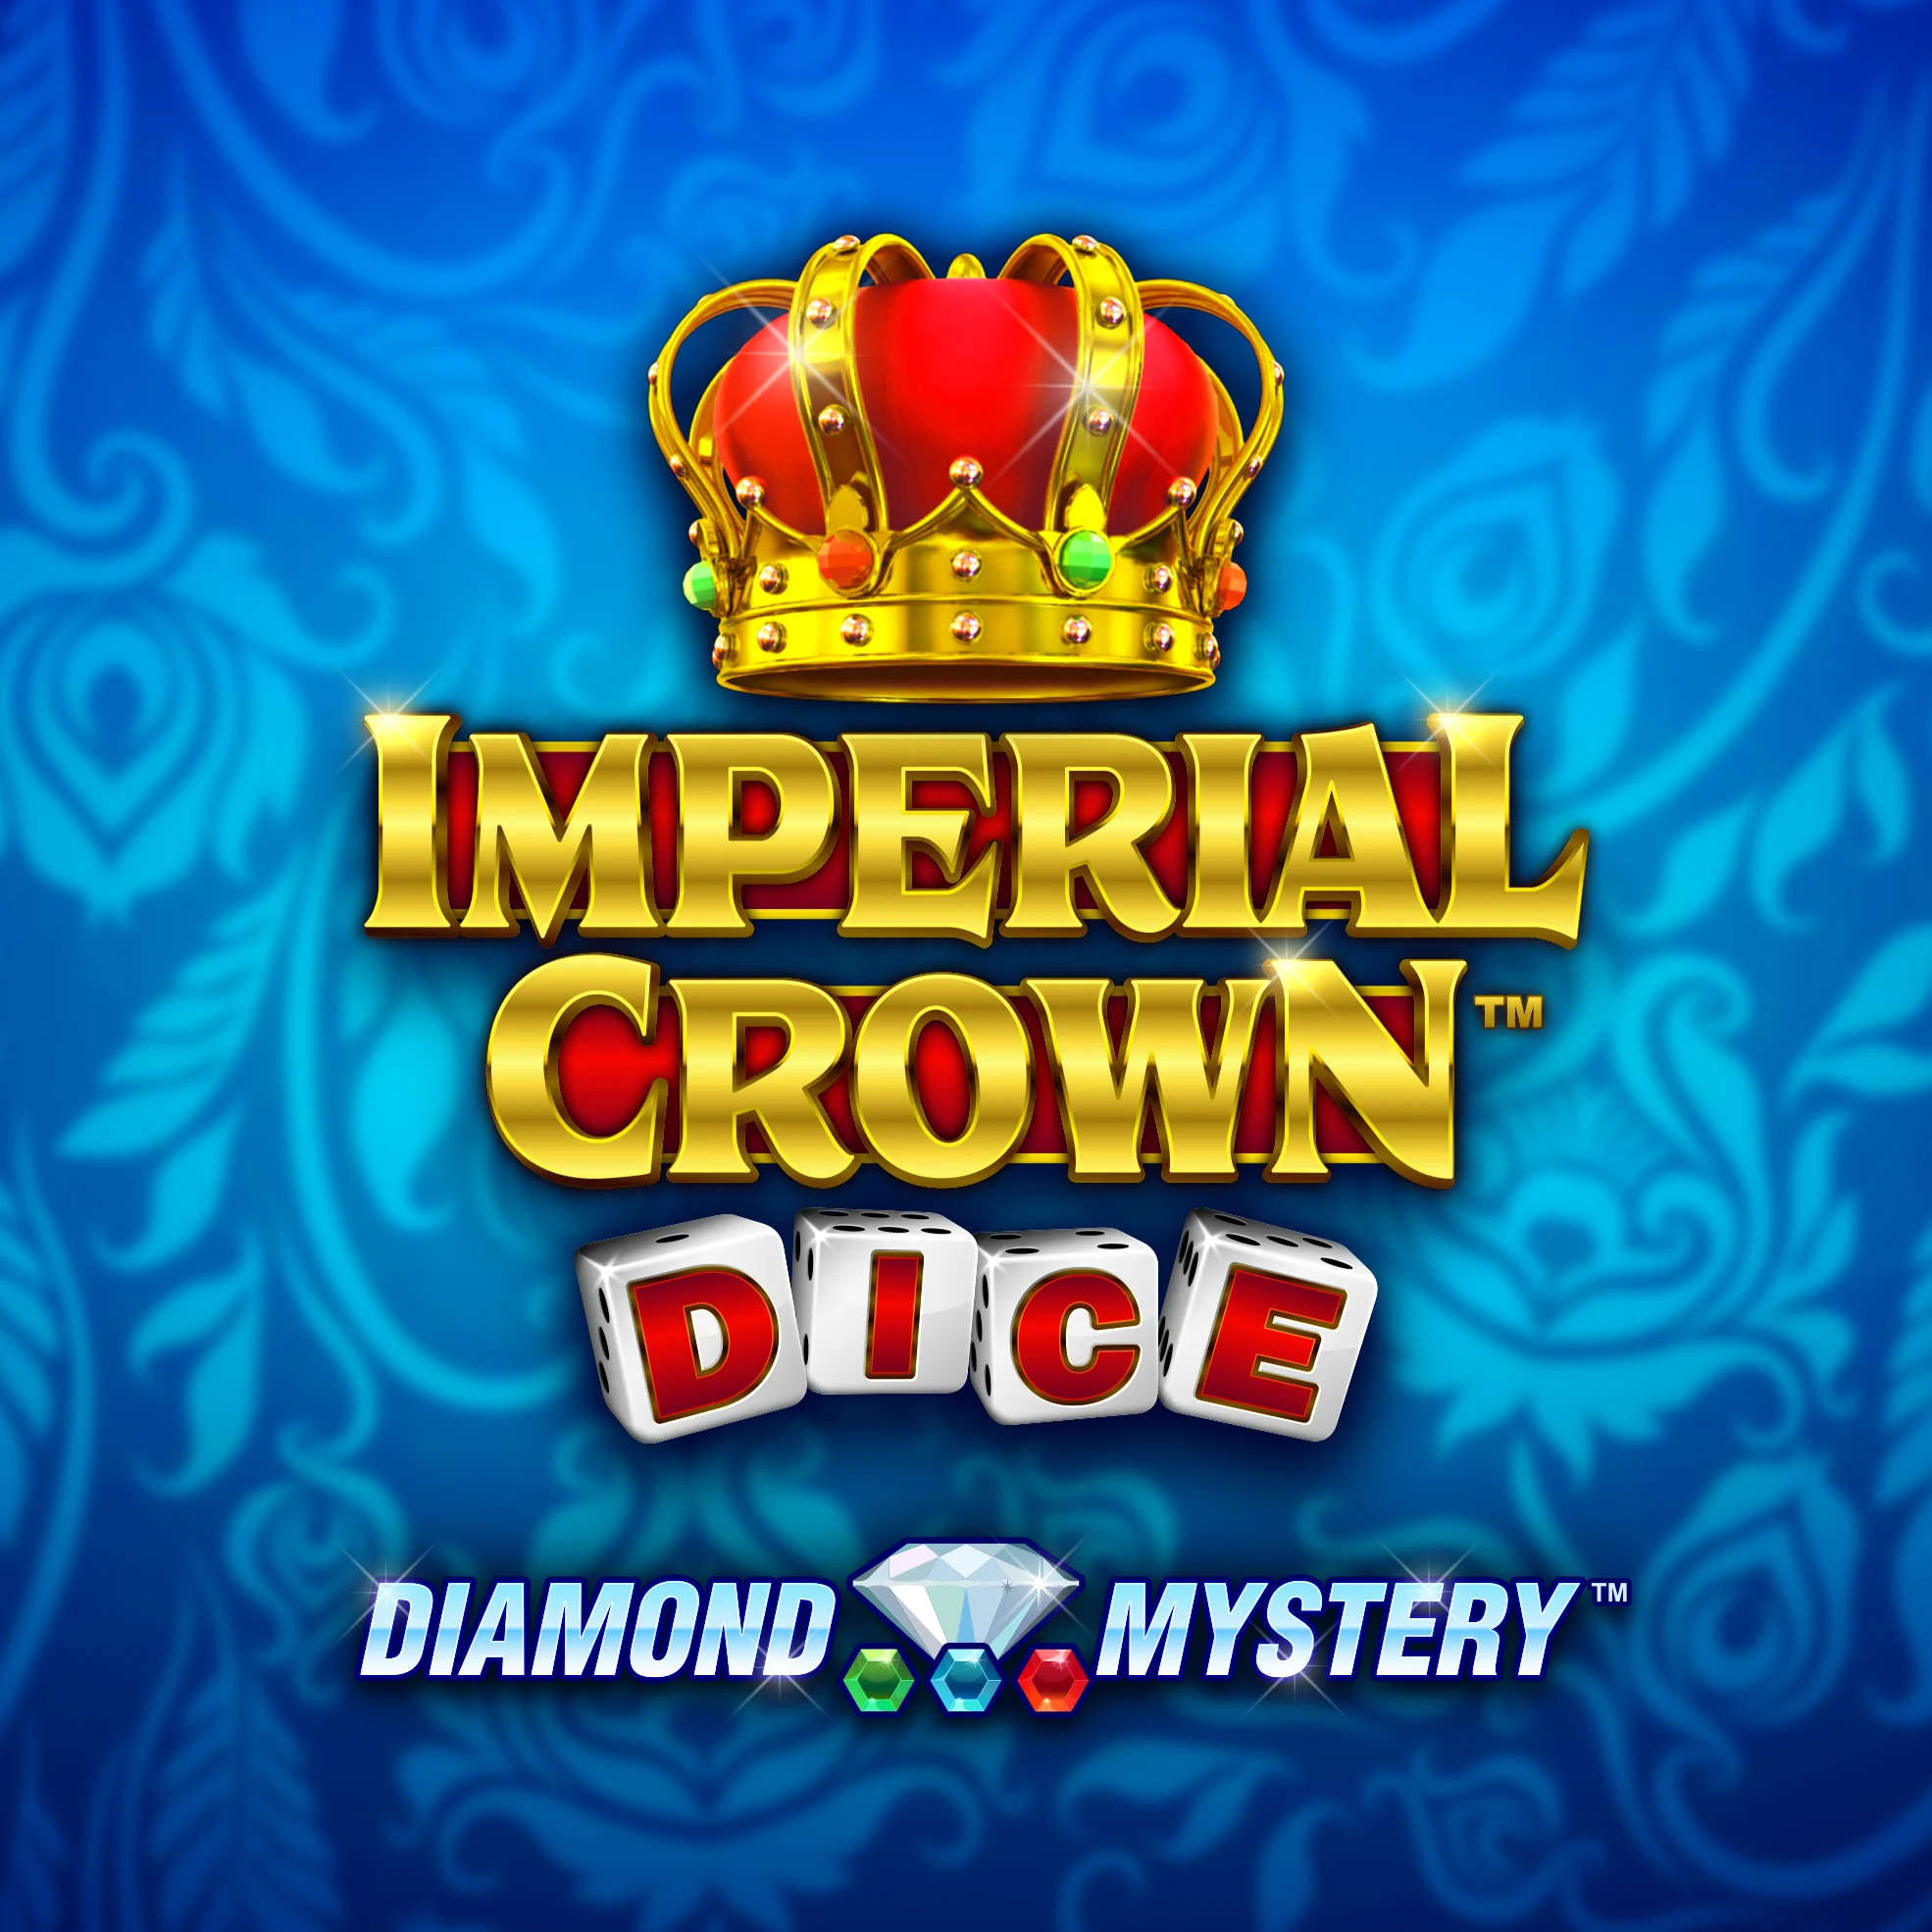 Play Imperial Crown™ Dice on Starcasinodice.be online casino